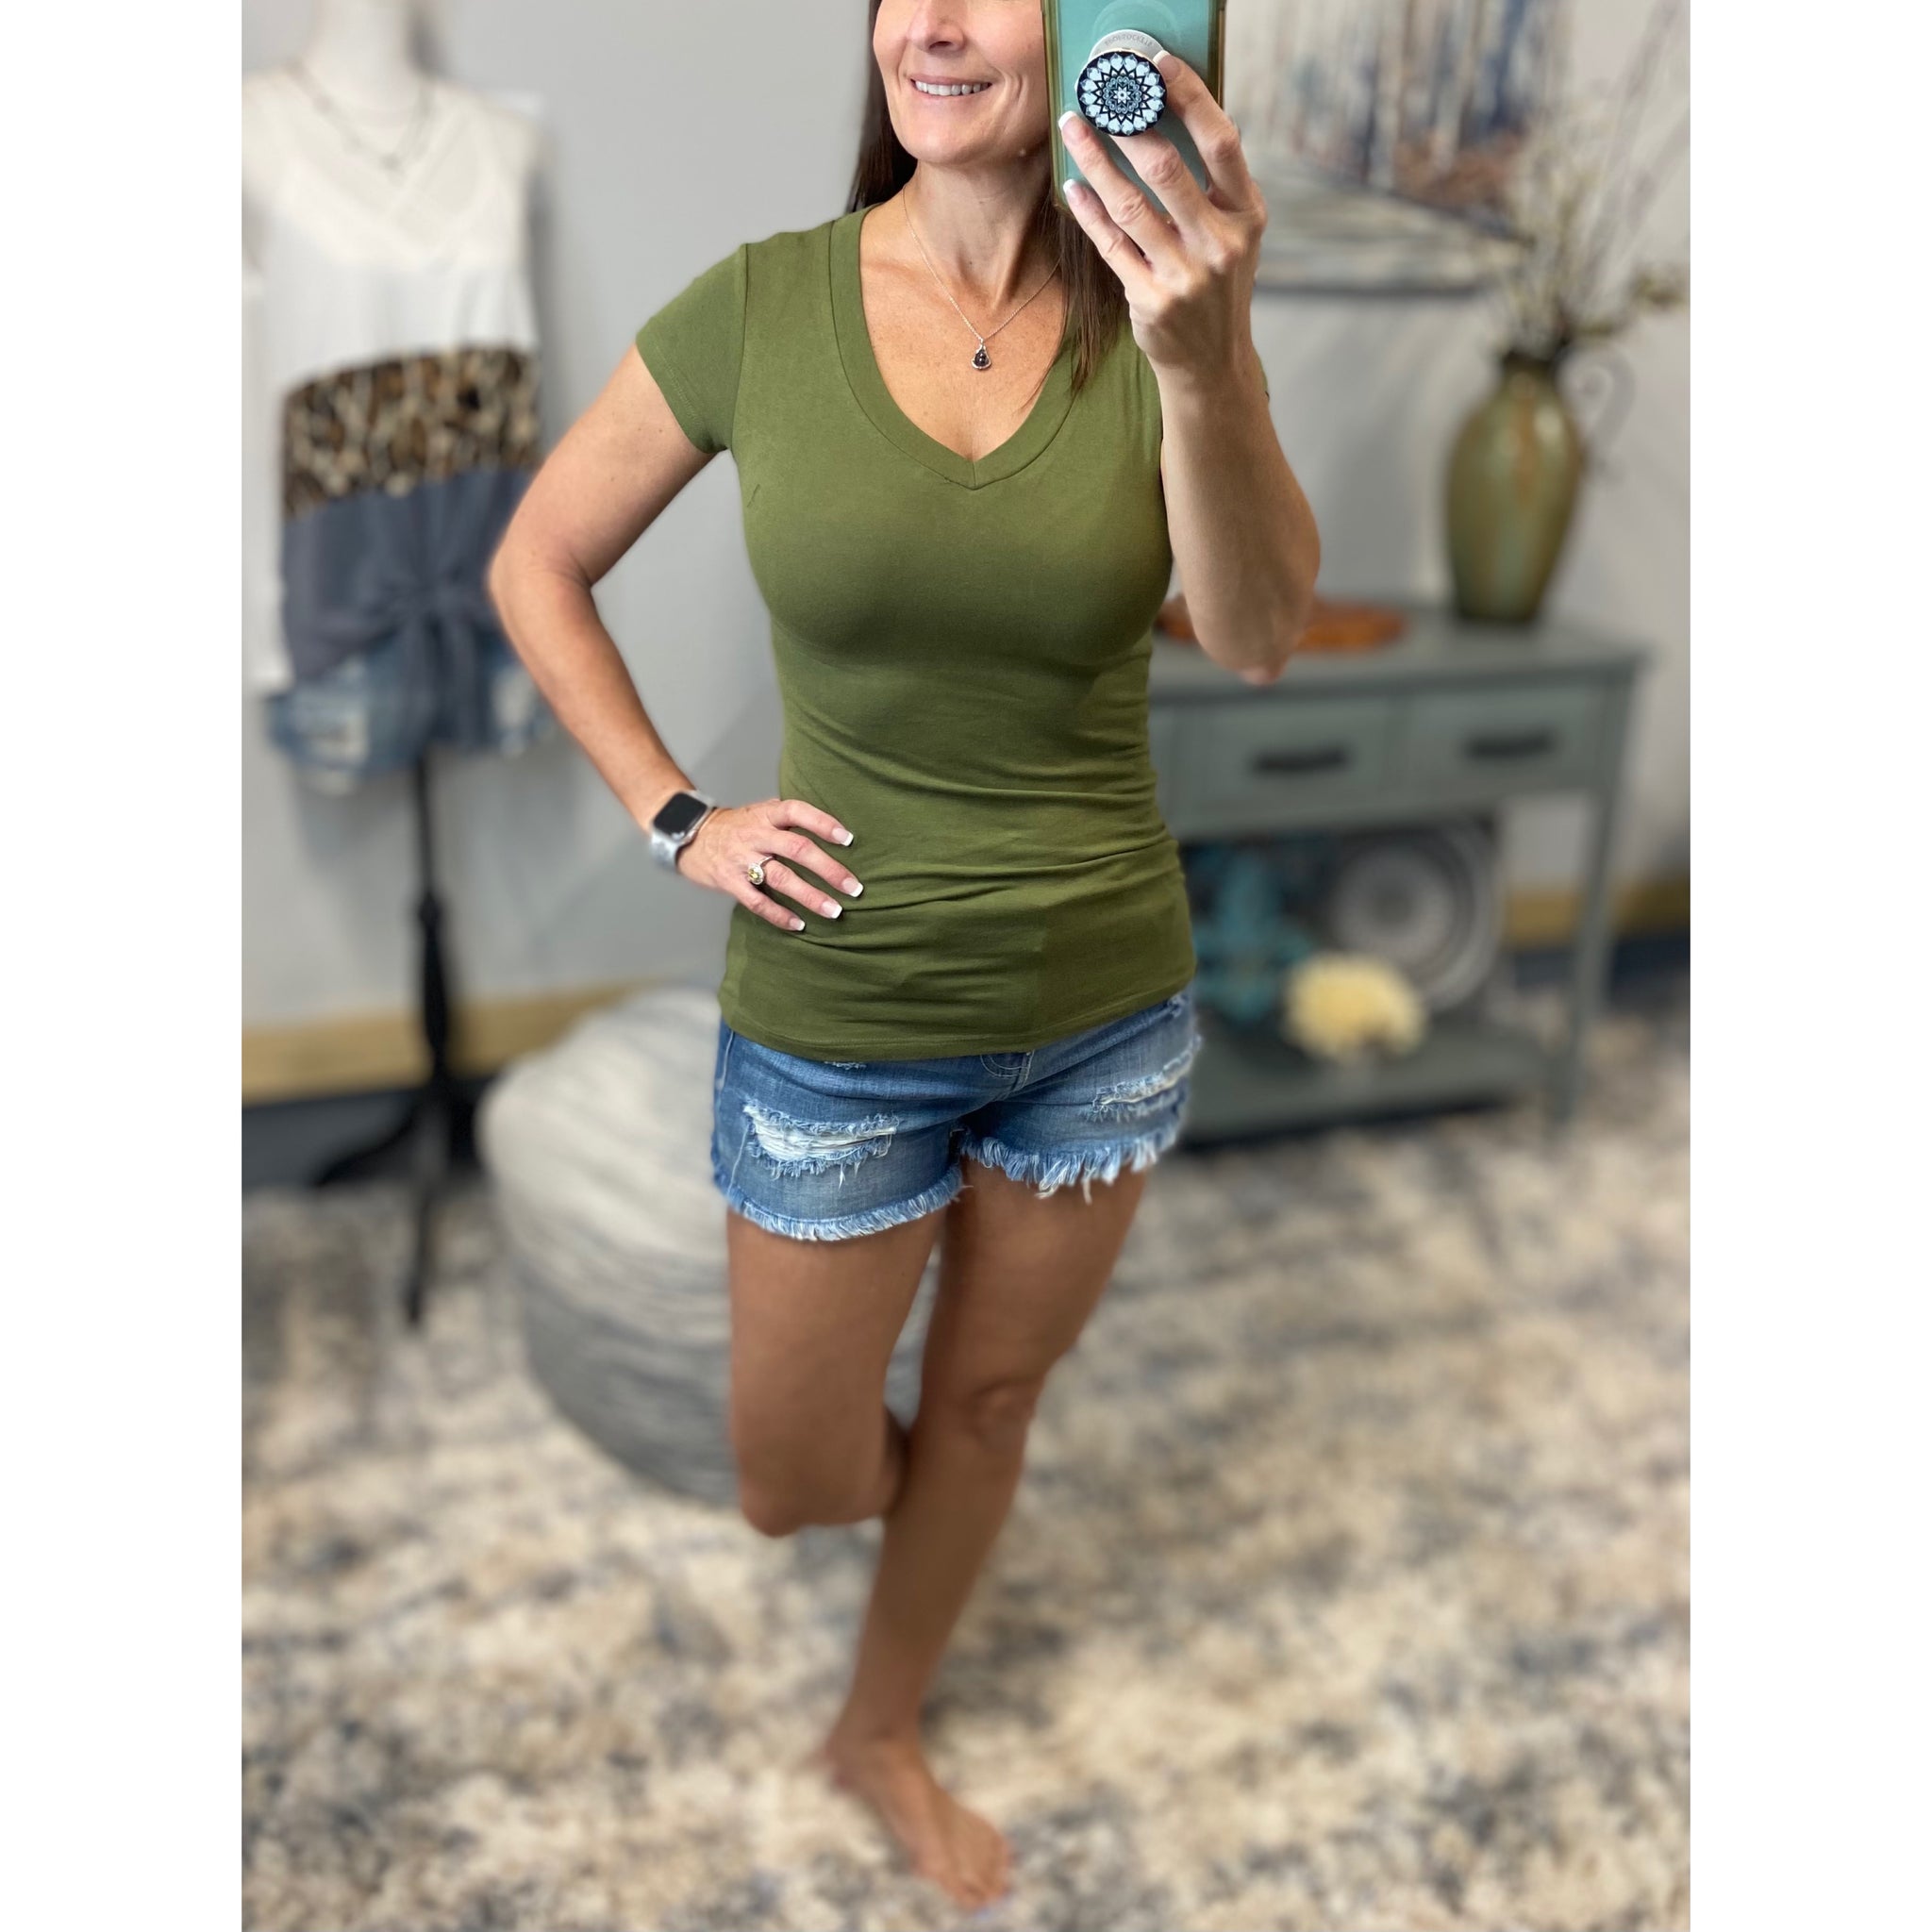 “Basic Babe” Low Cut V-Neck Cleavage Baby Slimming Basic Tee Shirt Top Olive 1X/2X/3X